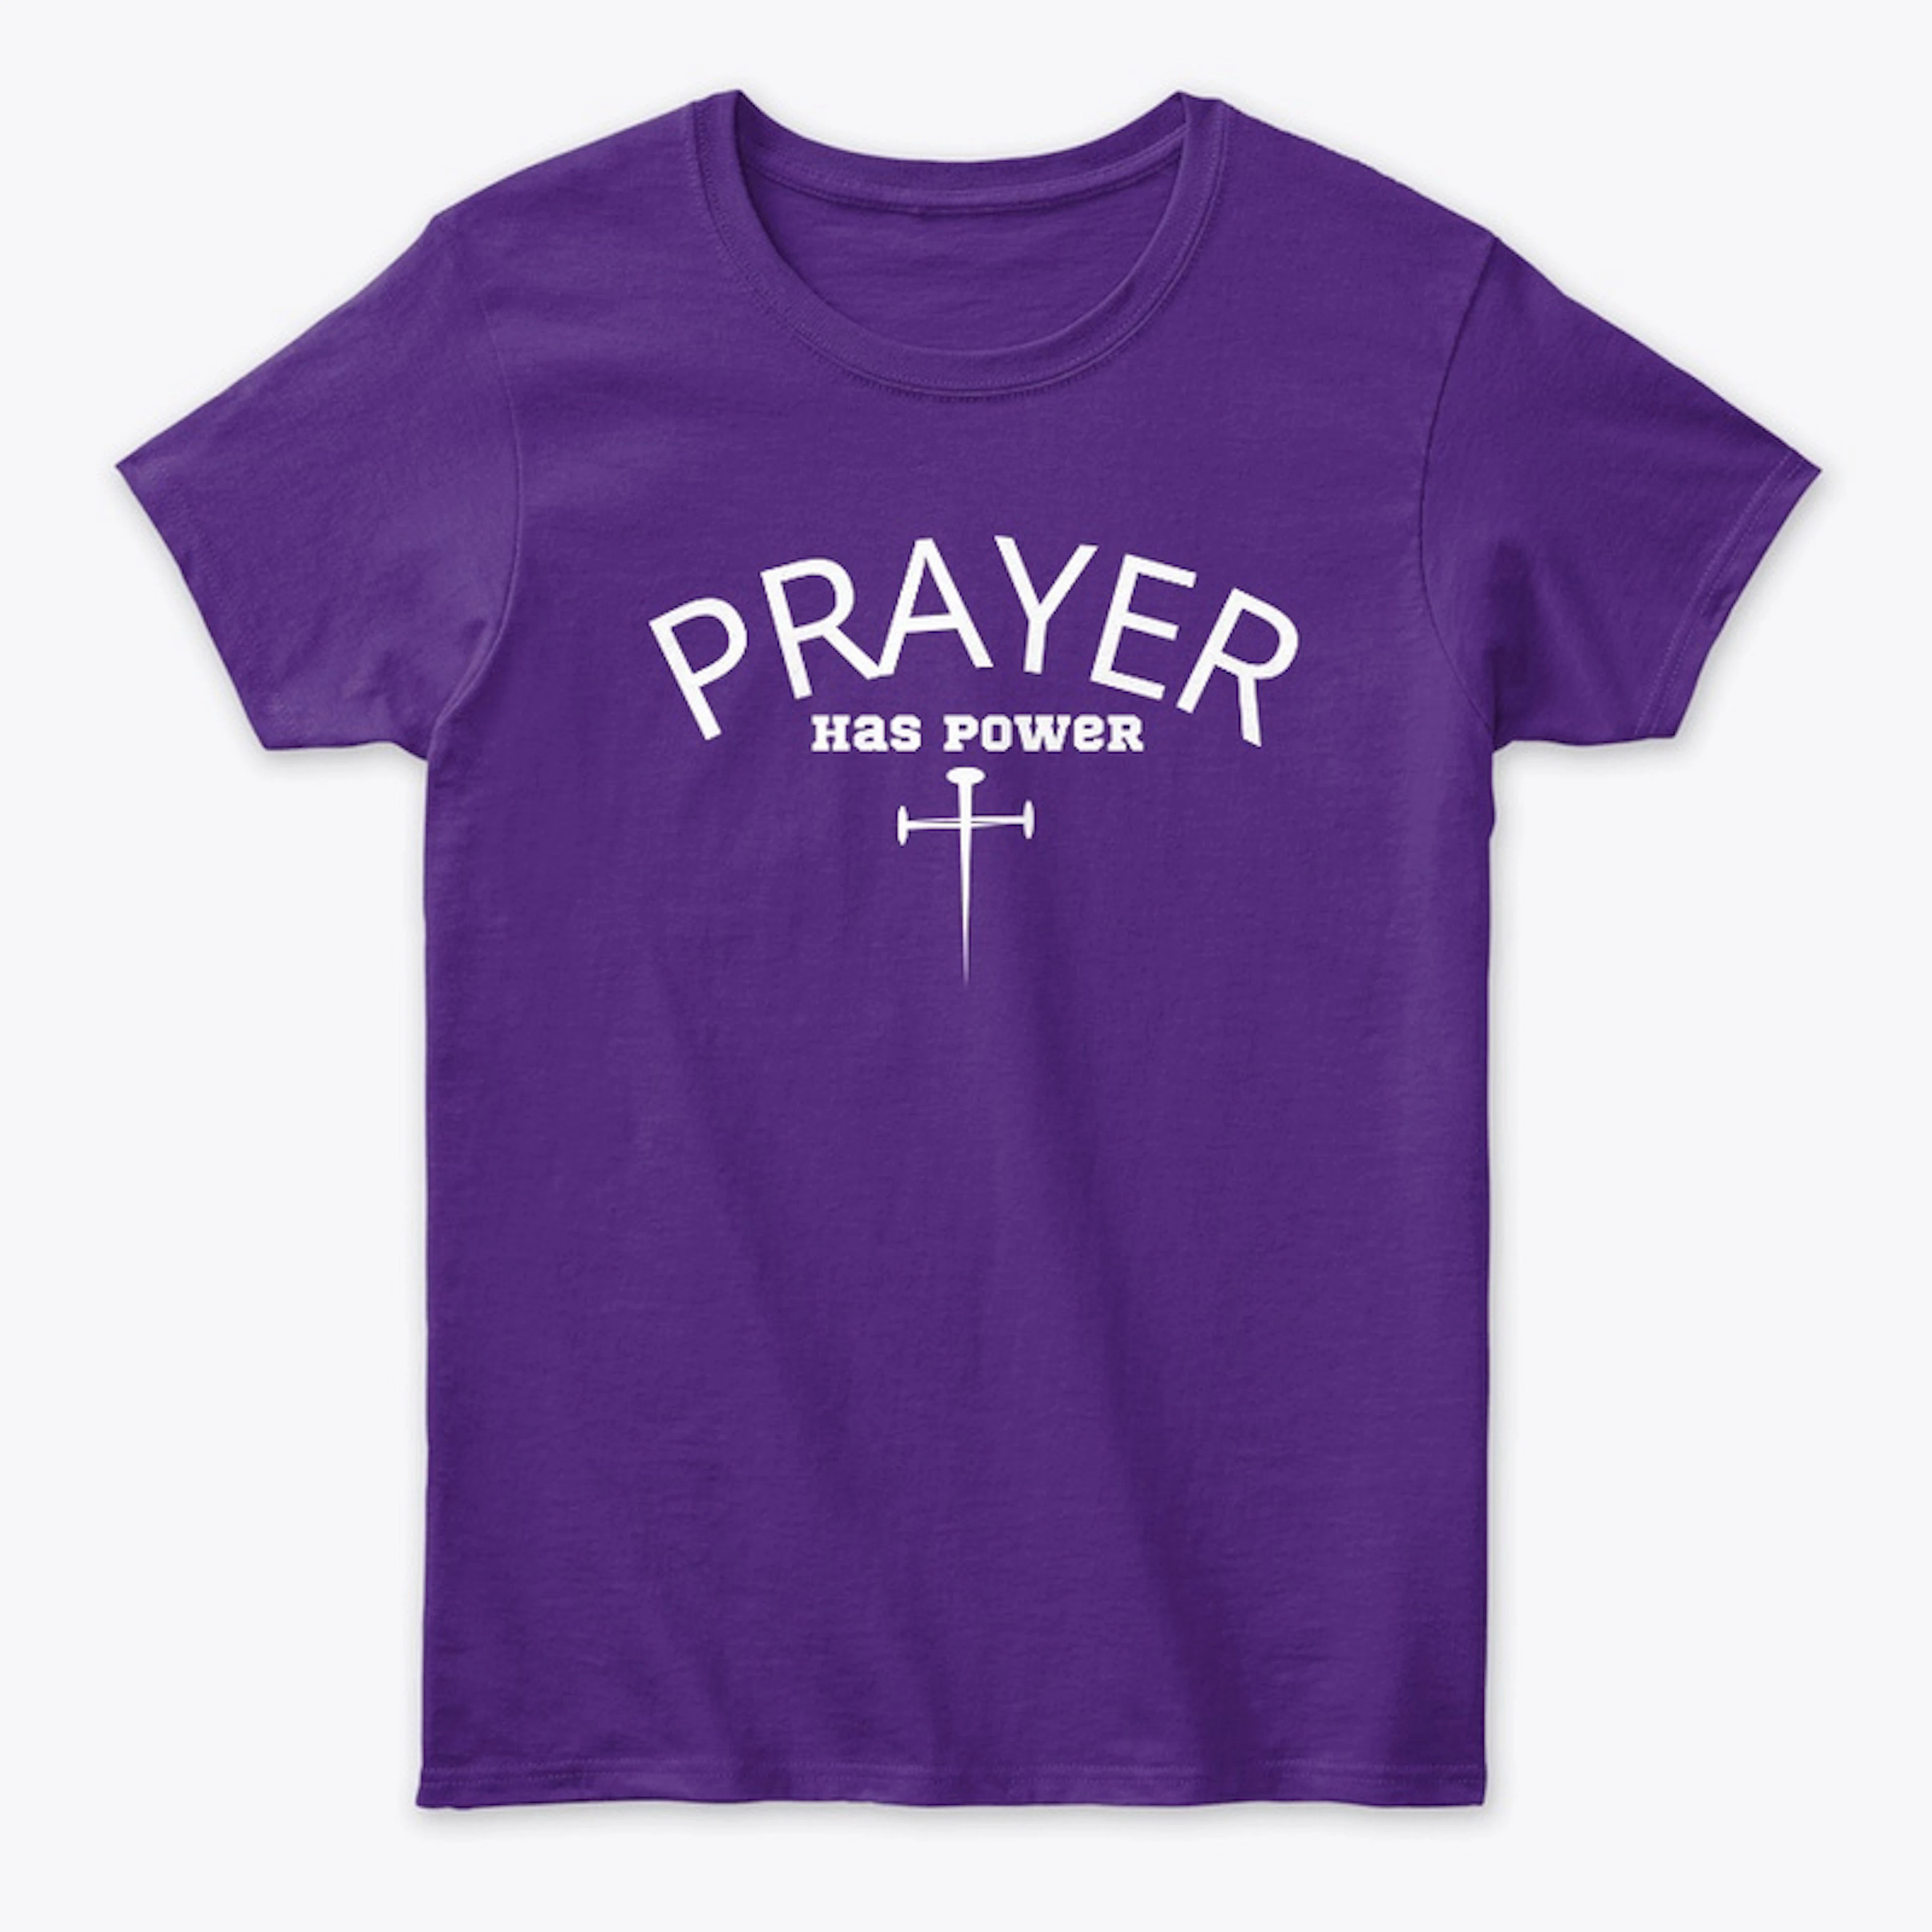 Prayer has Power Collection